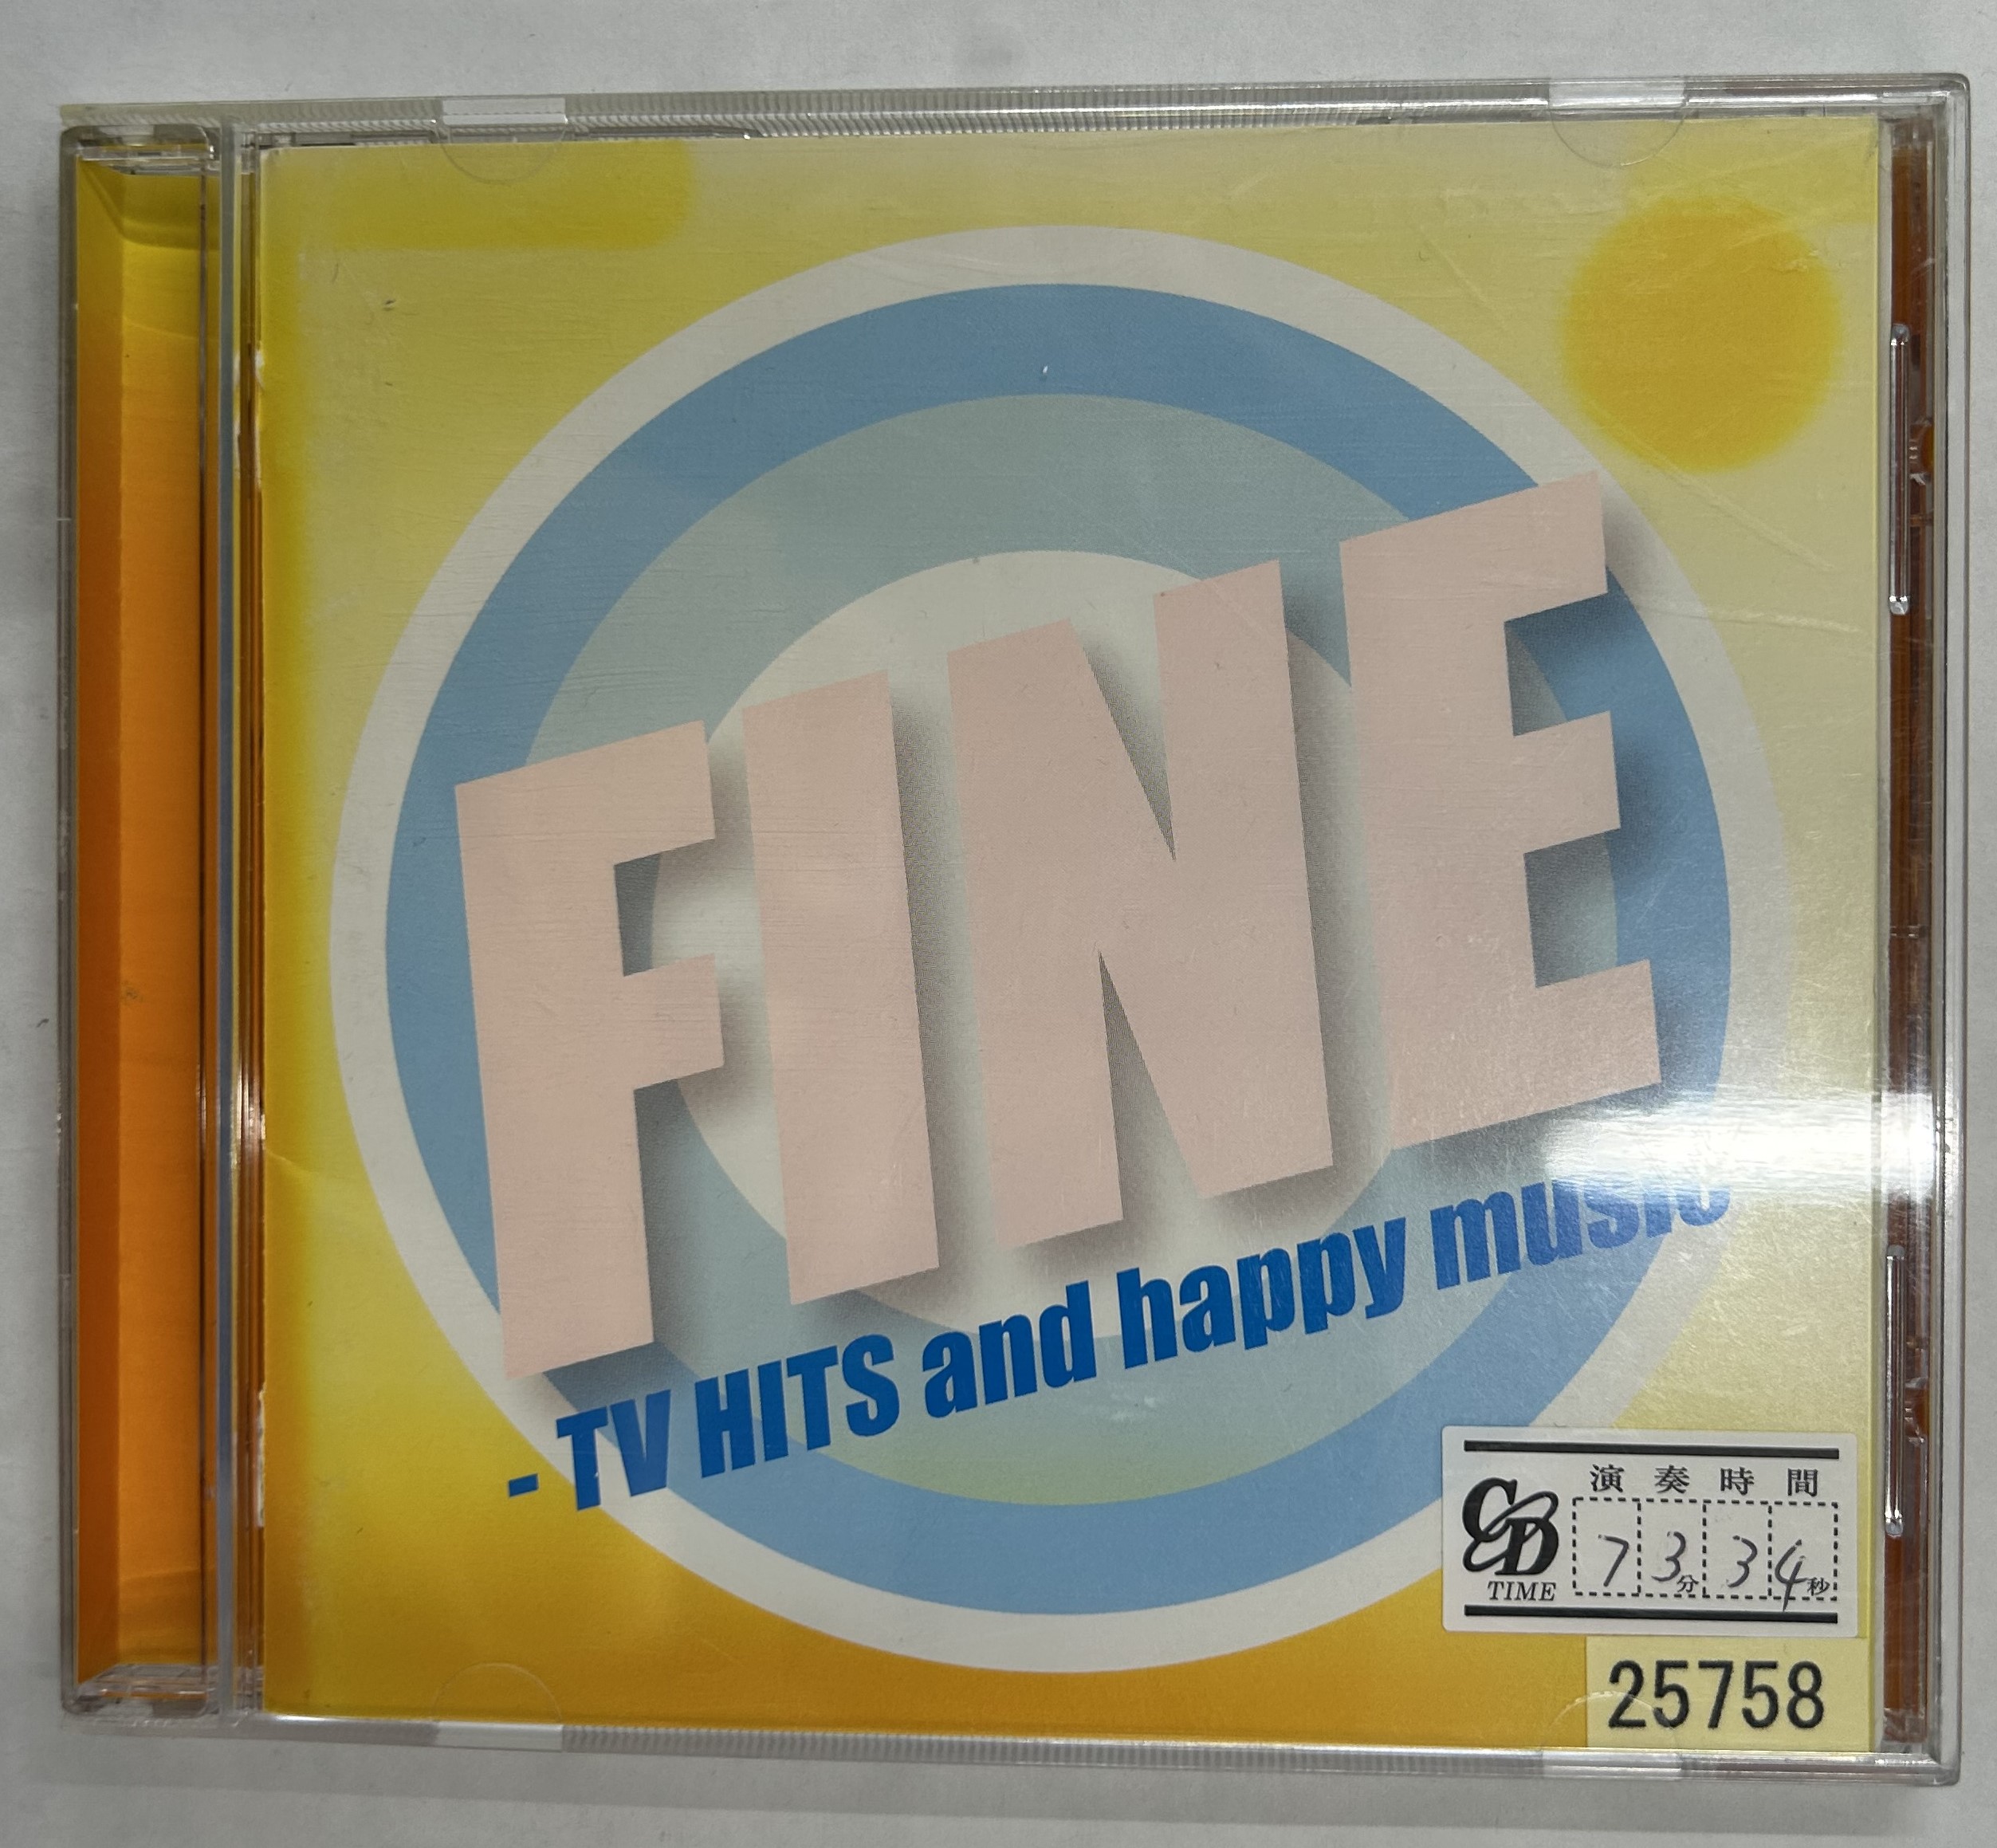 [ free shipping ]cd48587*FINE-TV HITS and happy music-( album )/ secondhand goods [CD]